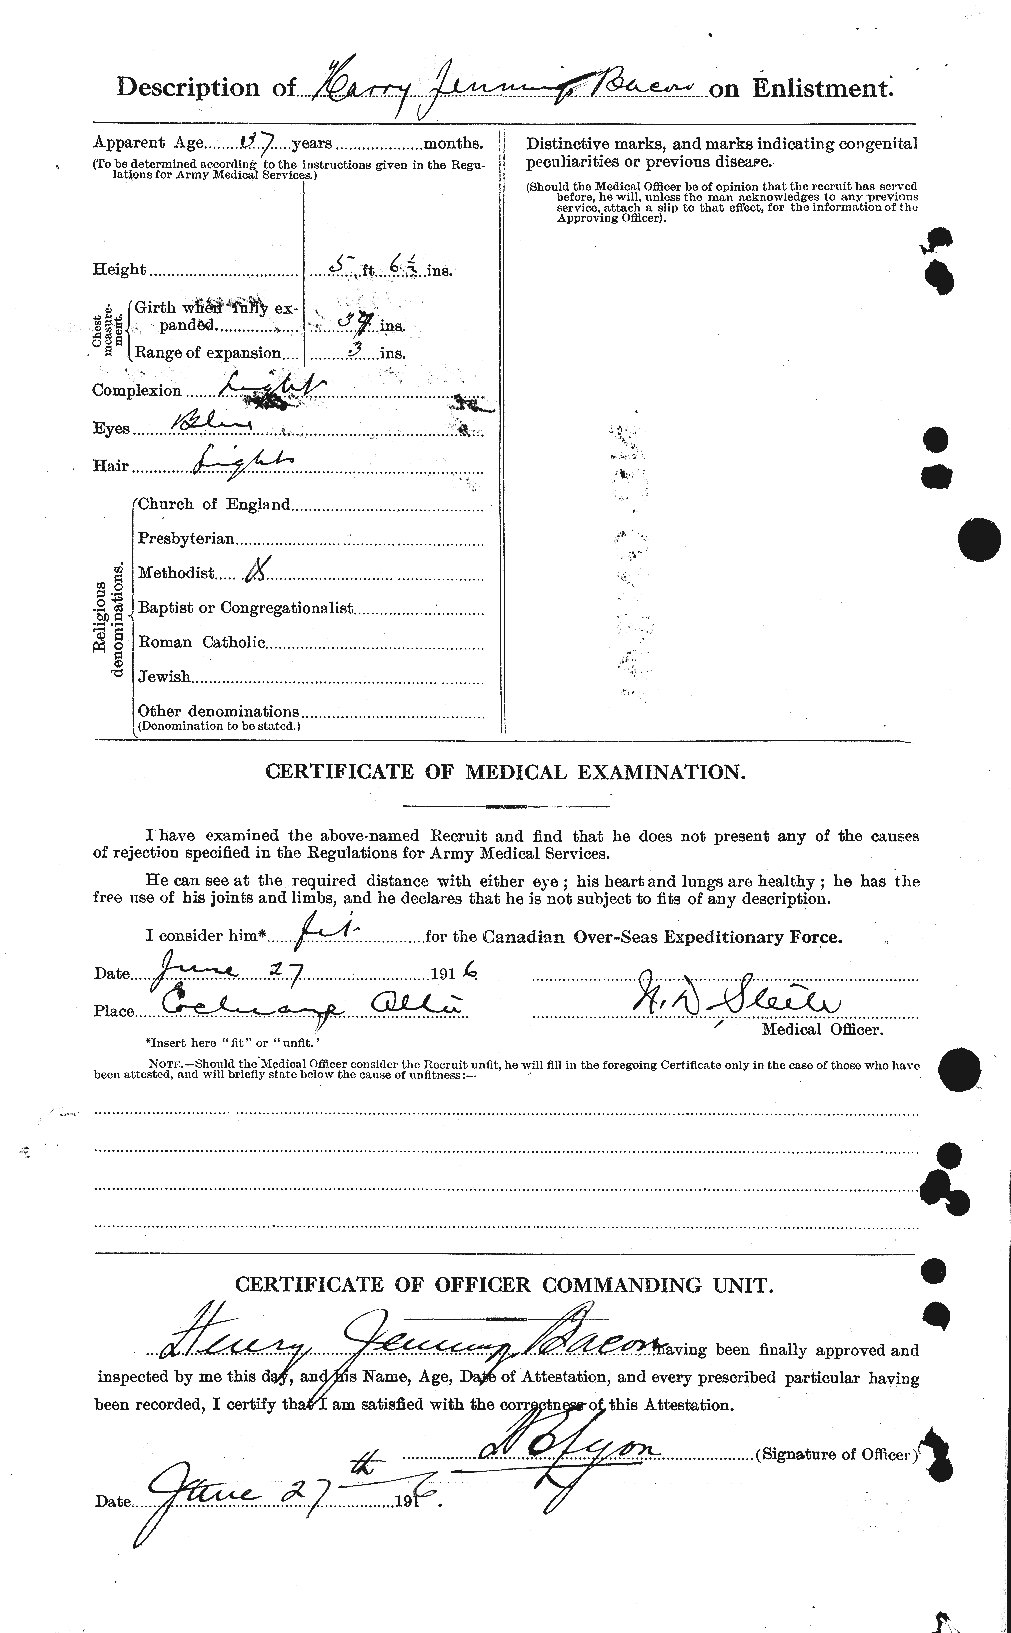 Personnel Records of the First World War - CEF 217883b